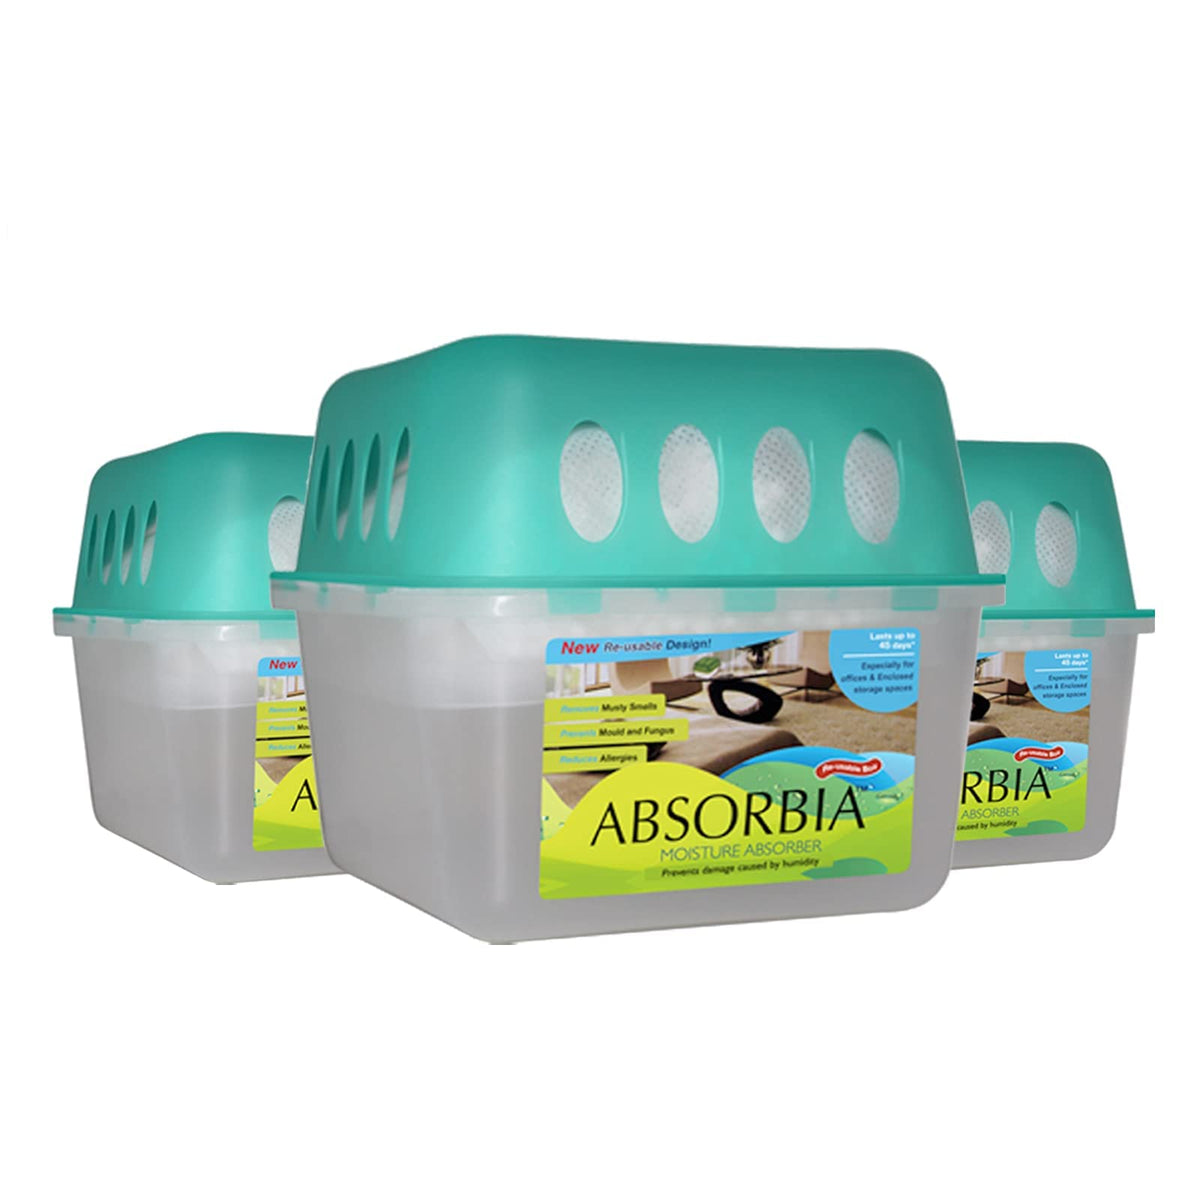 Absorbia Moisture Absorber | Absorbia Reusable Box w/Refill - Pack of 12 (800ml) | Dehumidifier for Basement, Storerooms, Spare Rooms Lofts | Fights Against Moisture, Mould, Fungus Musty Smells